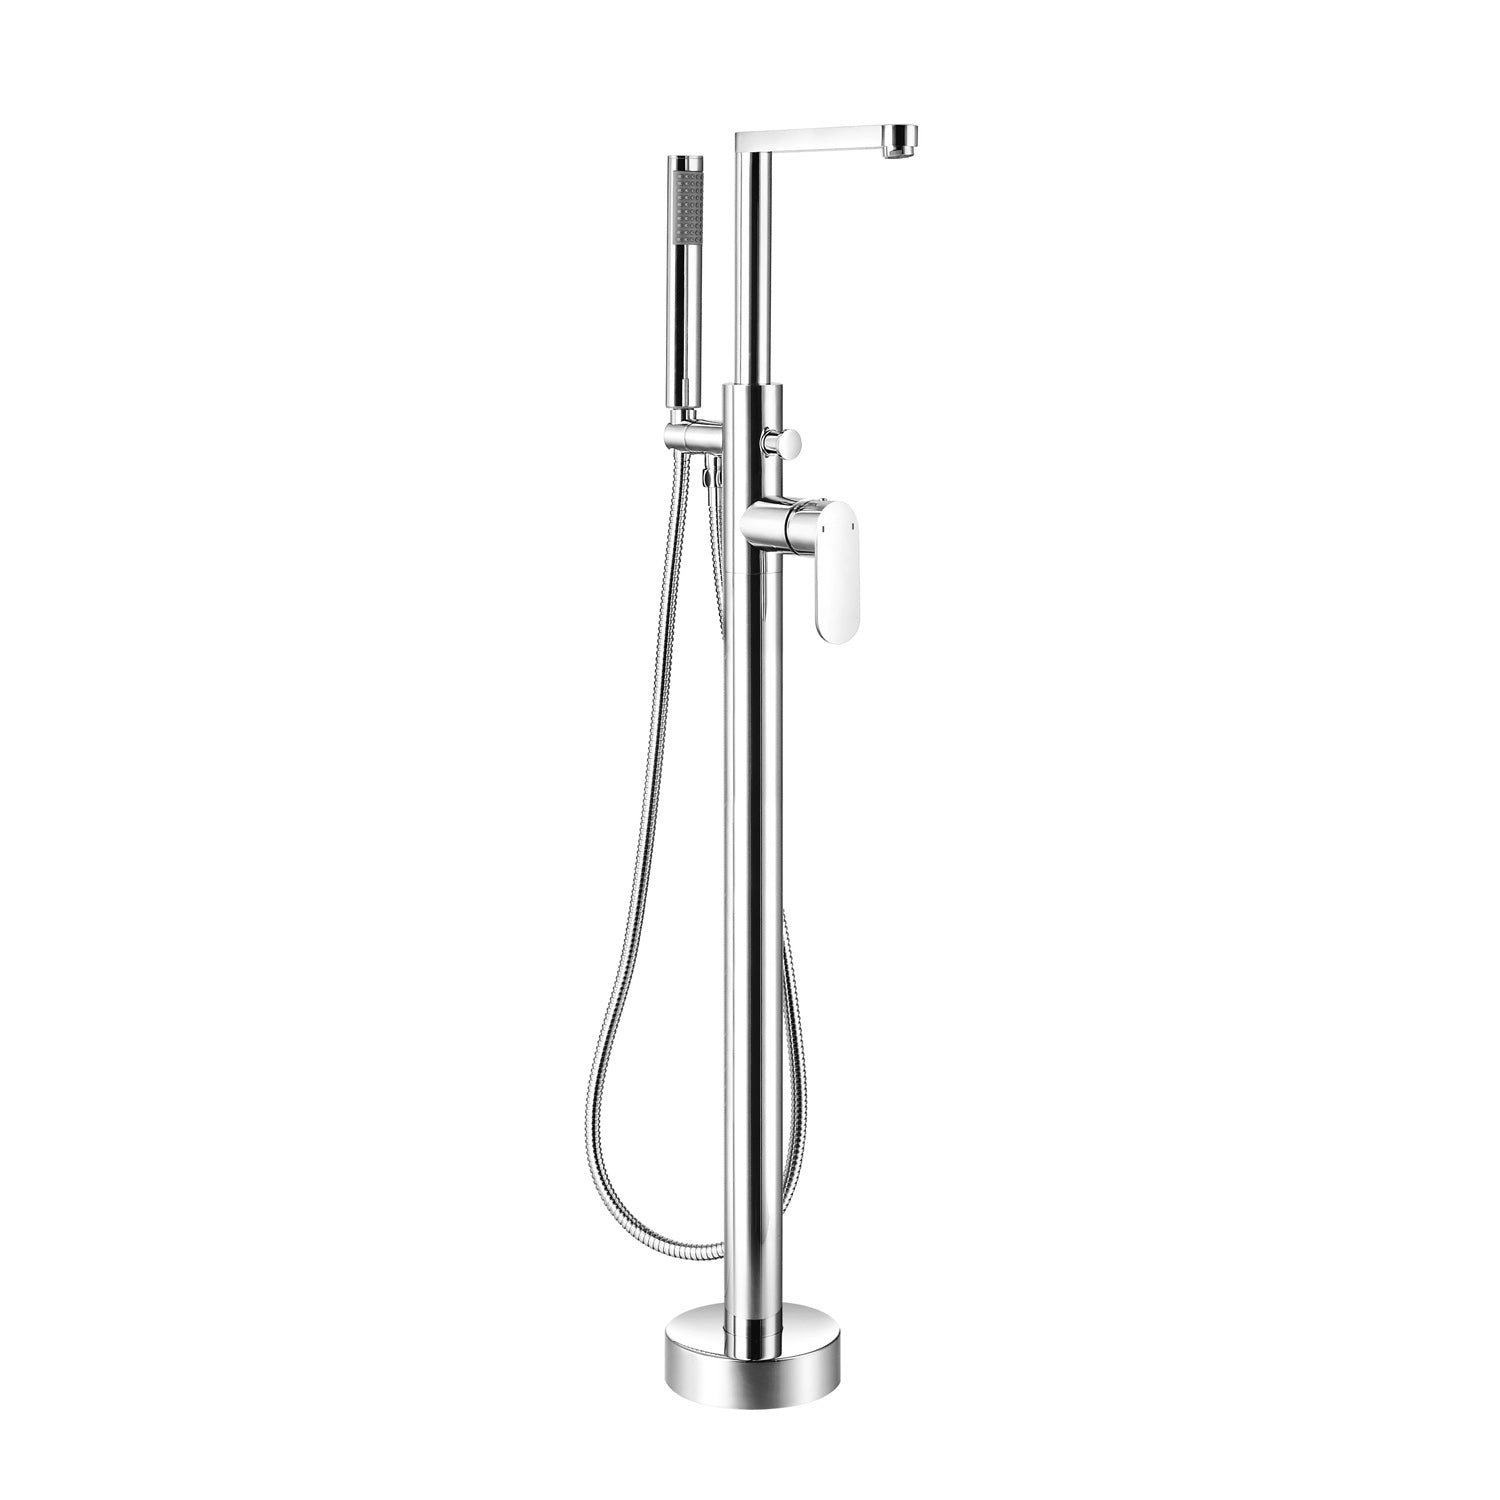 DAX Freestanding Hot Tub Filler with Hand Shower and Square Spout, Stainless Steel Body, Chrome Finish, 40-1/2 x 8-1/2 Inches (DAX-808-CR)